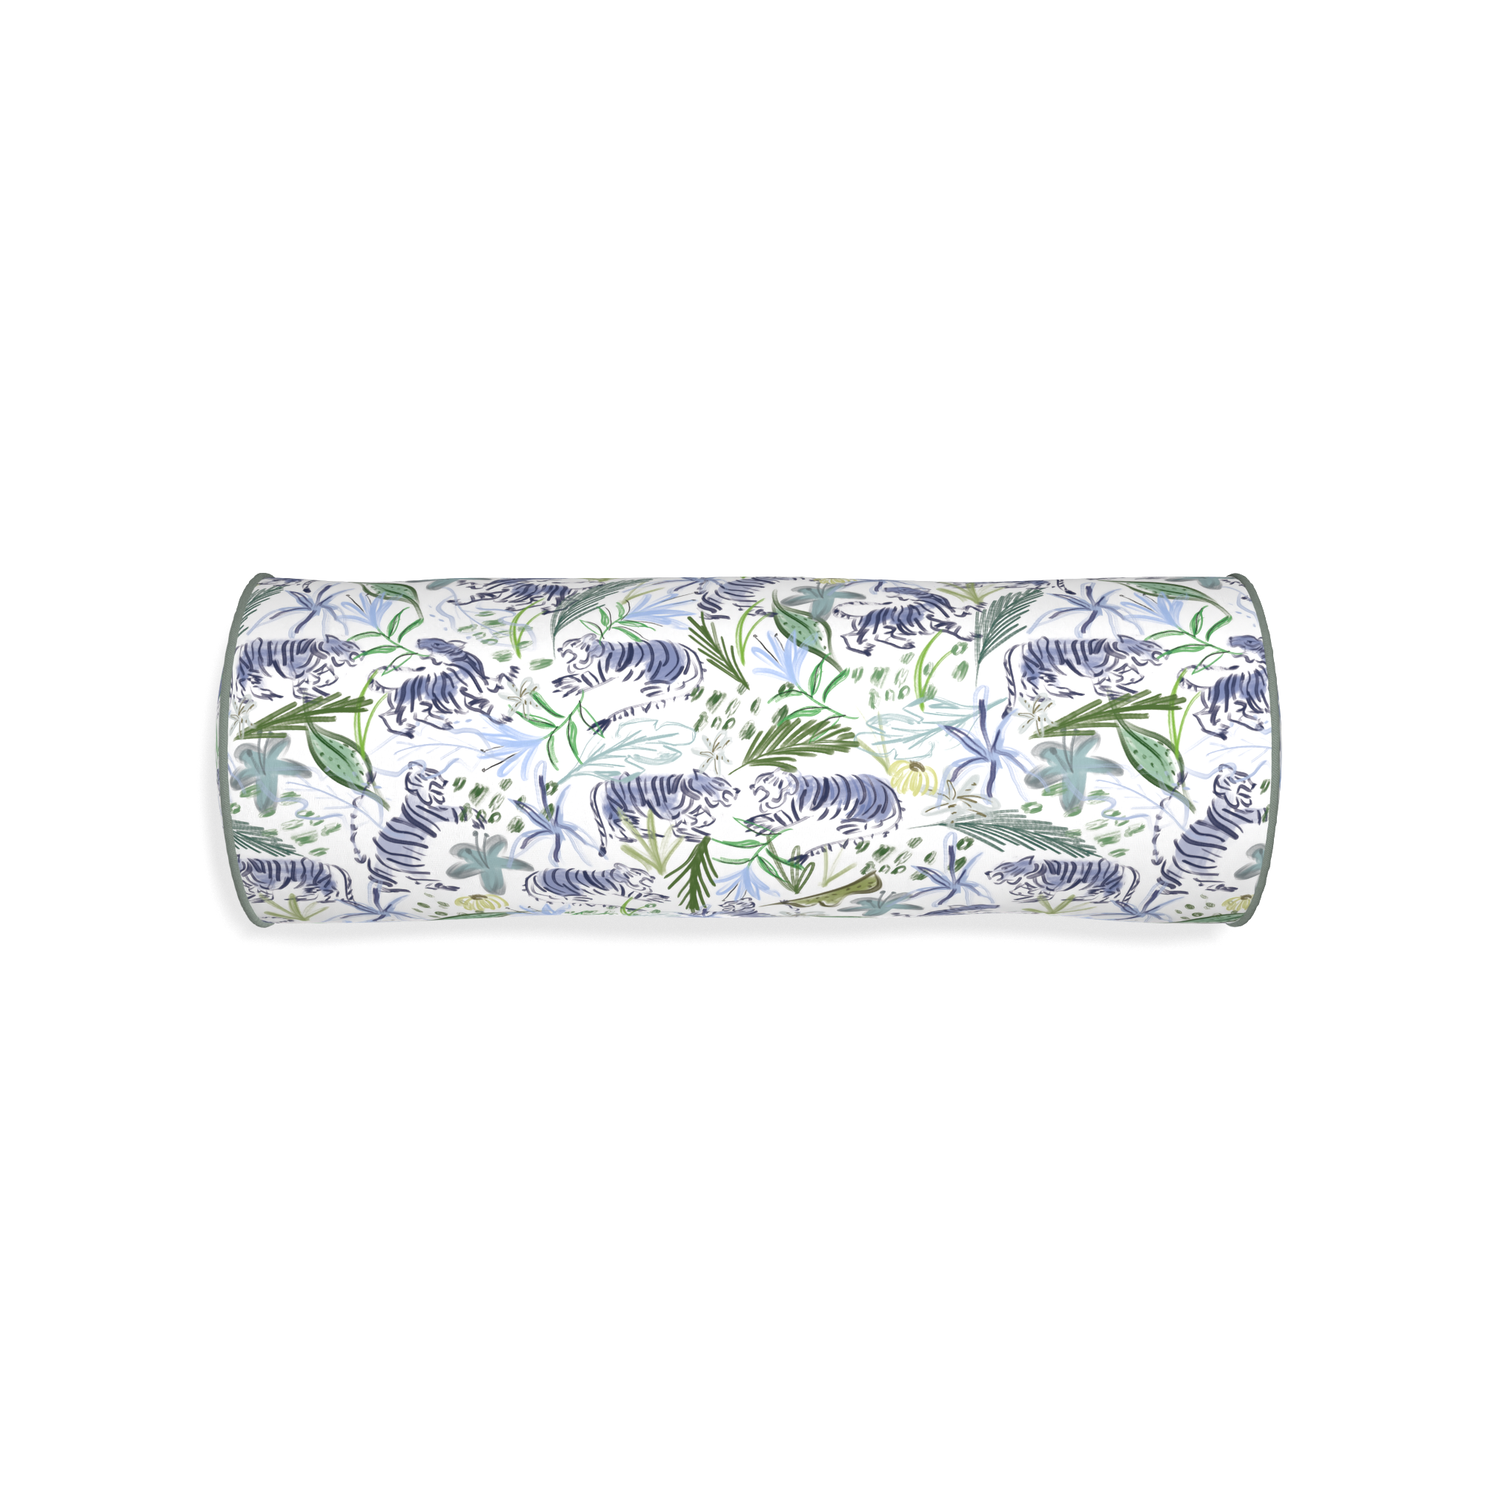 Bolster frida green custom green tigerpillow with sage piping on white background